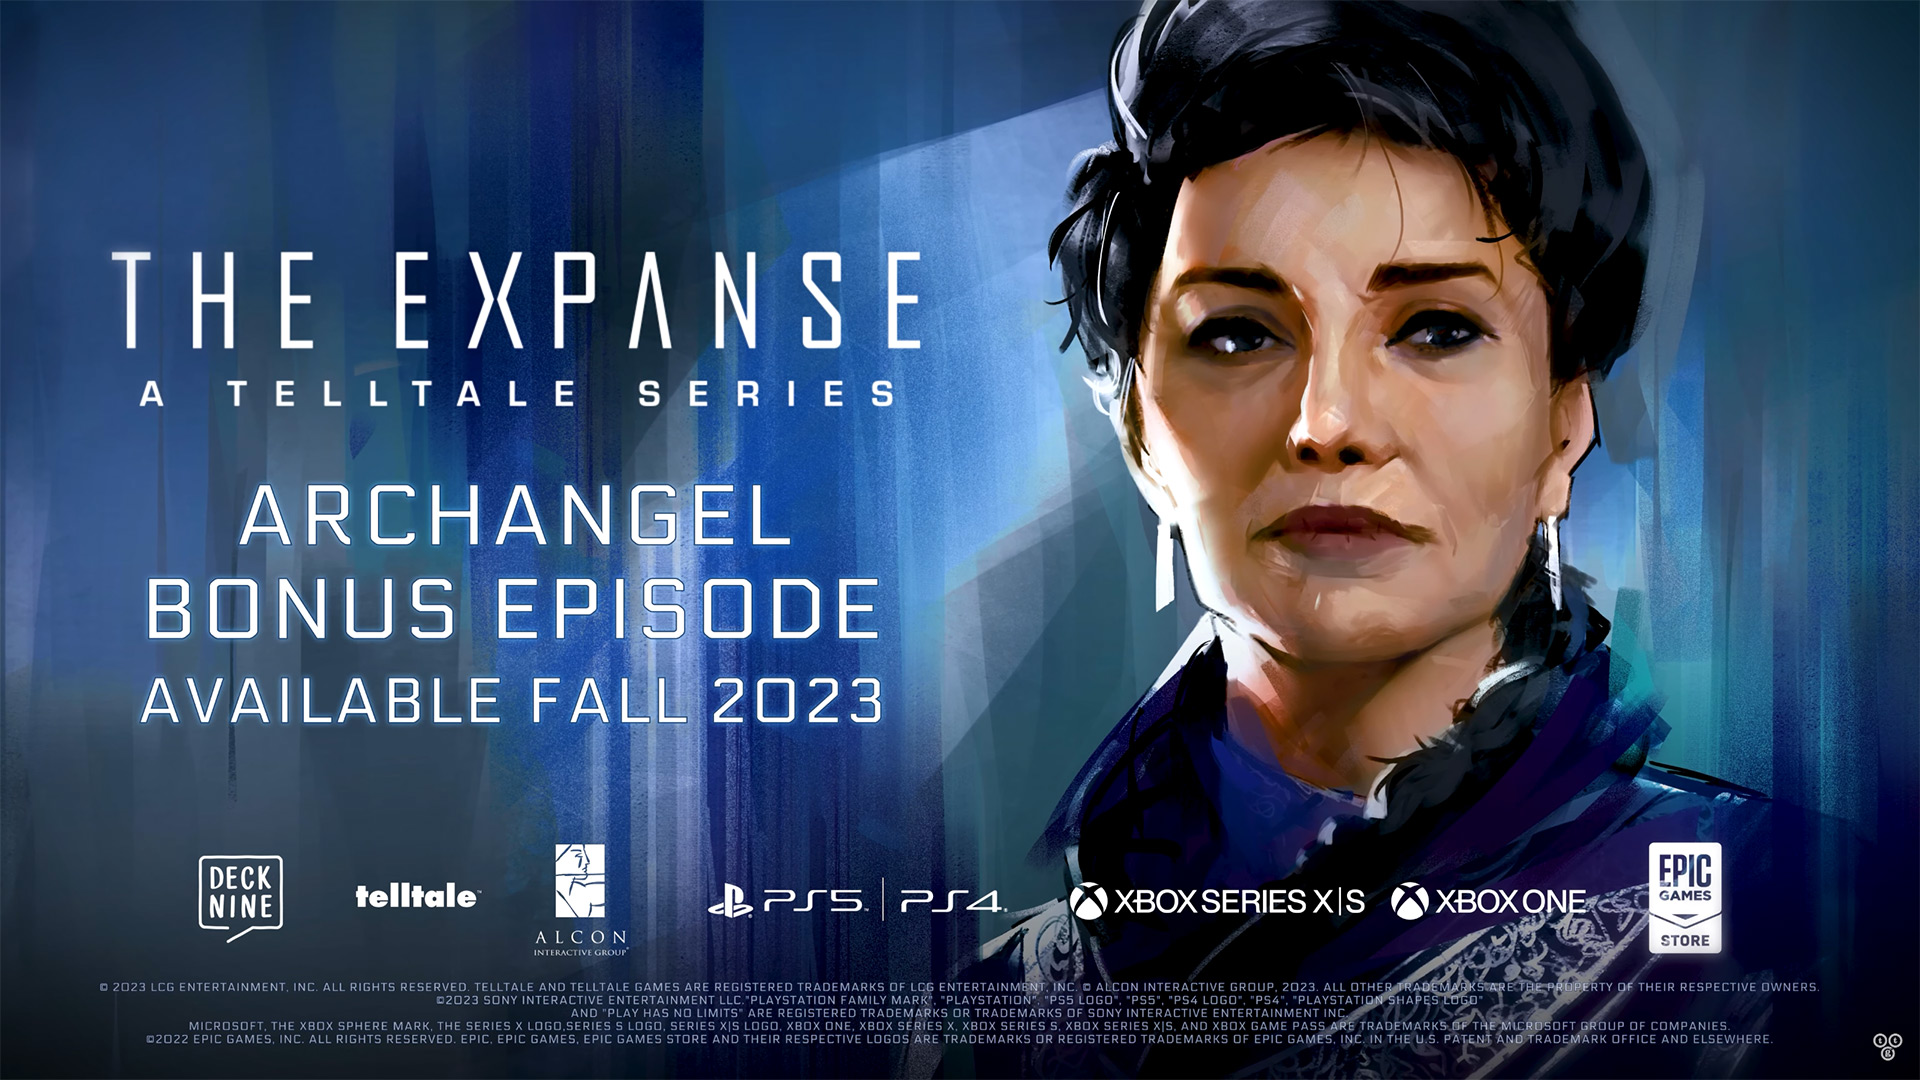 The Expanse: A Telltale Series will have a bonus episode launching this fall